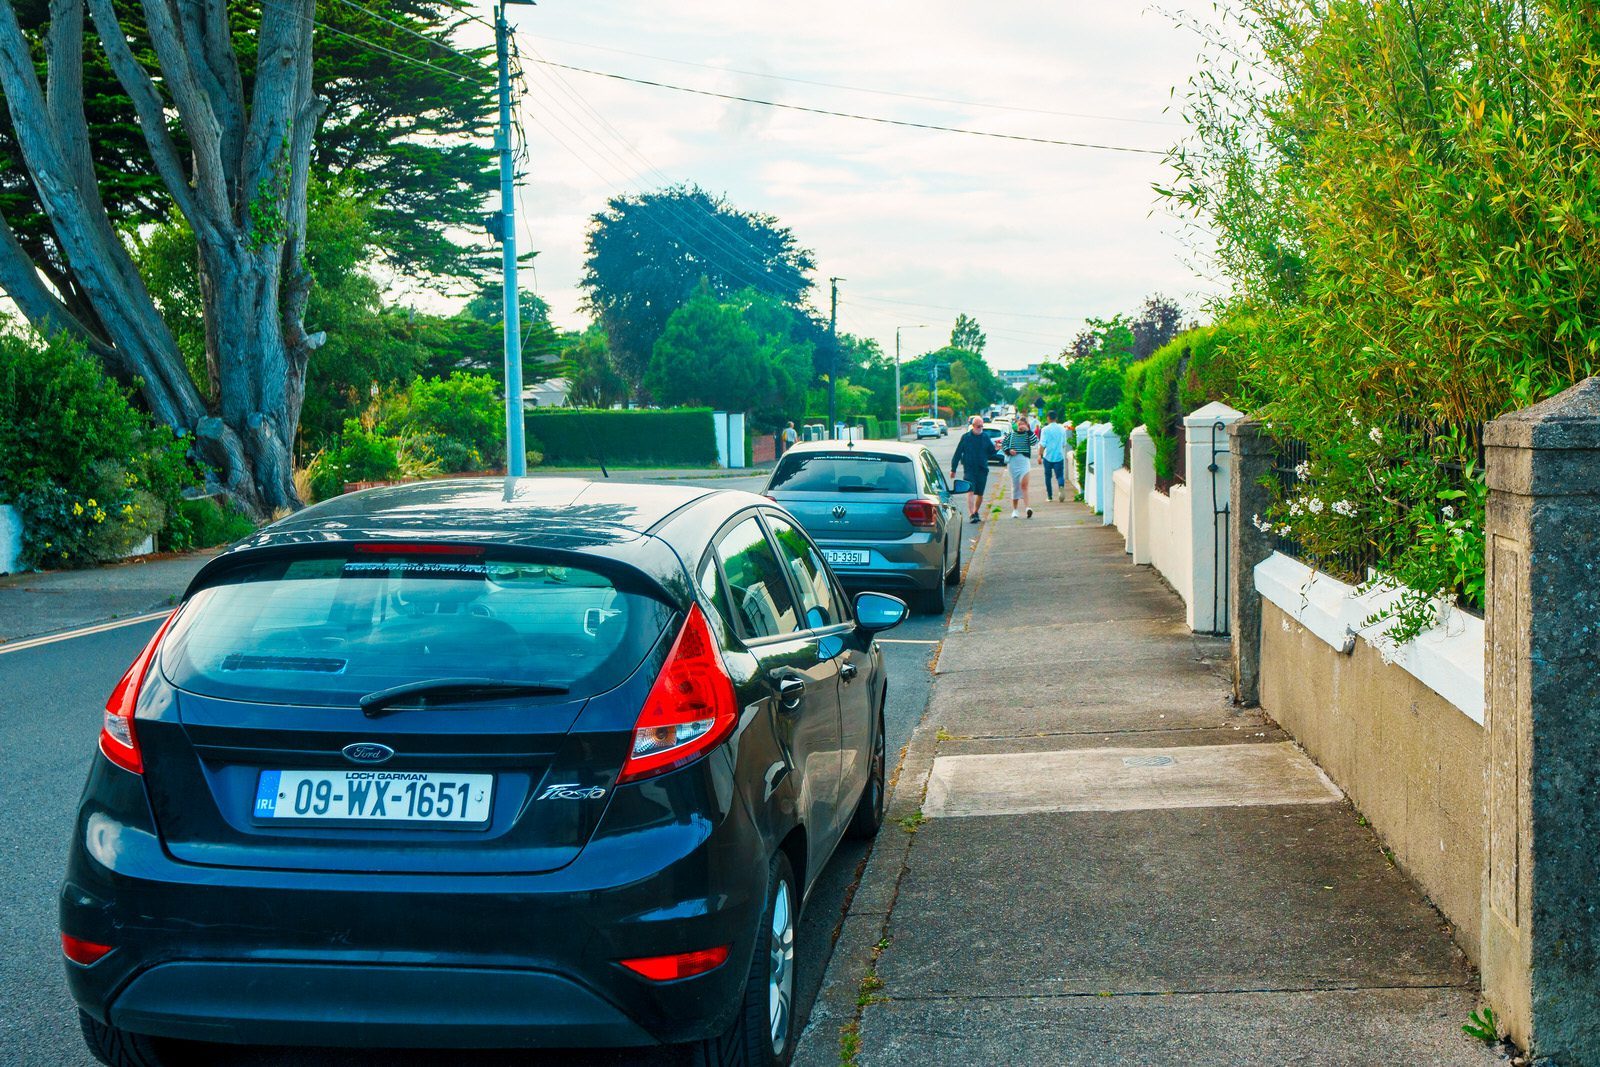 MEATH ROAD IN BRAY COUNTY WICKLOW [AS DESCRIBED BY GOOGLE'S BARD AI] 003